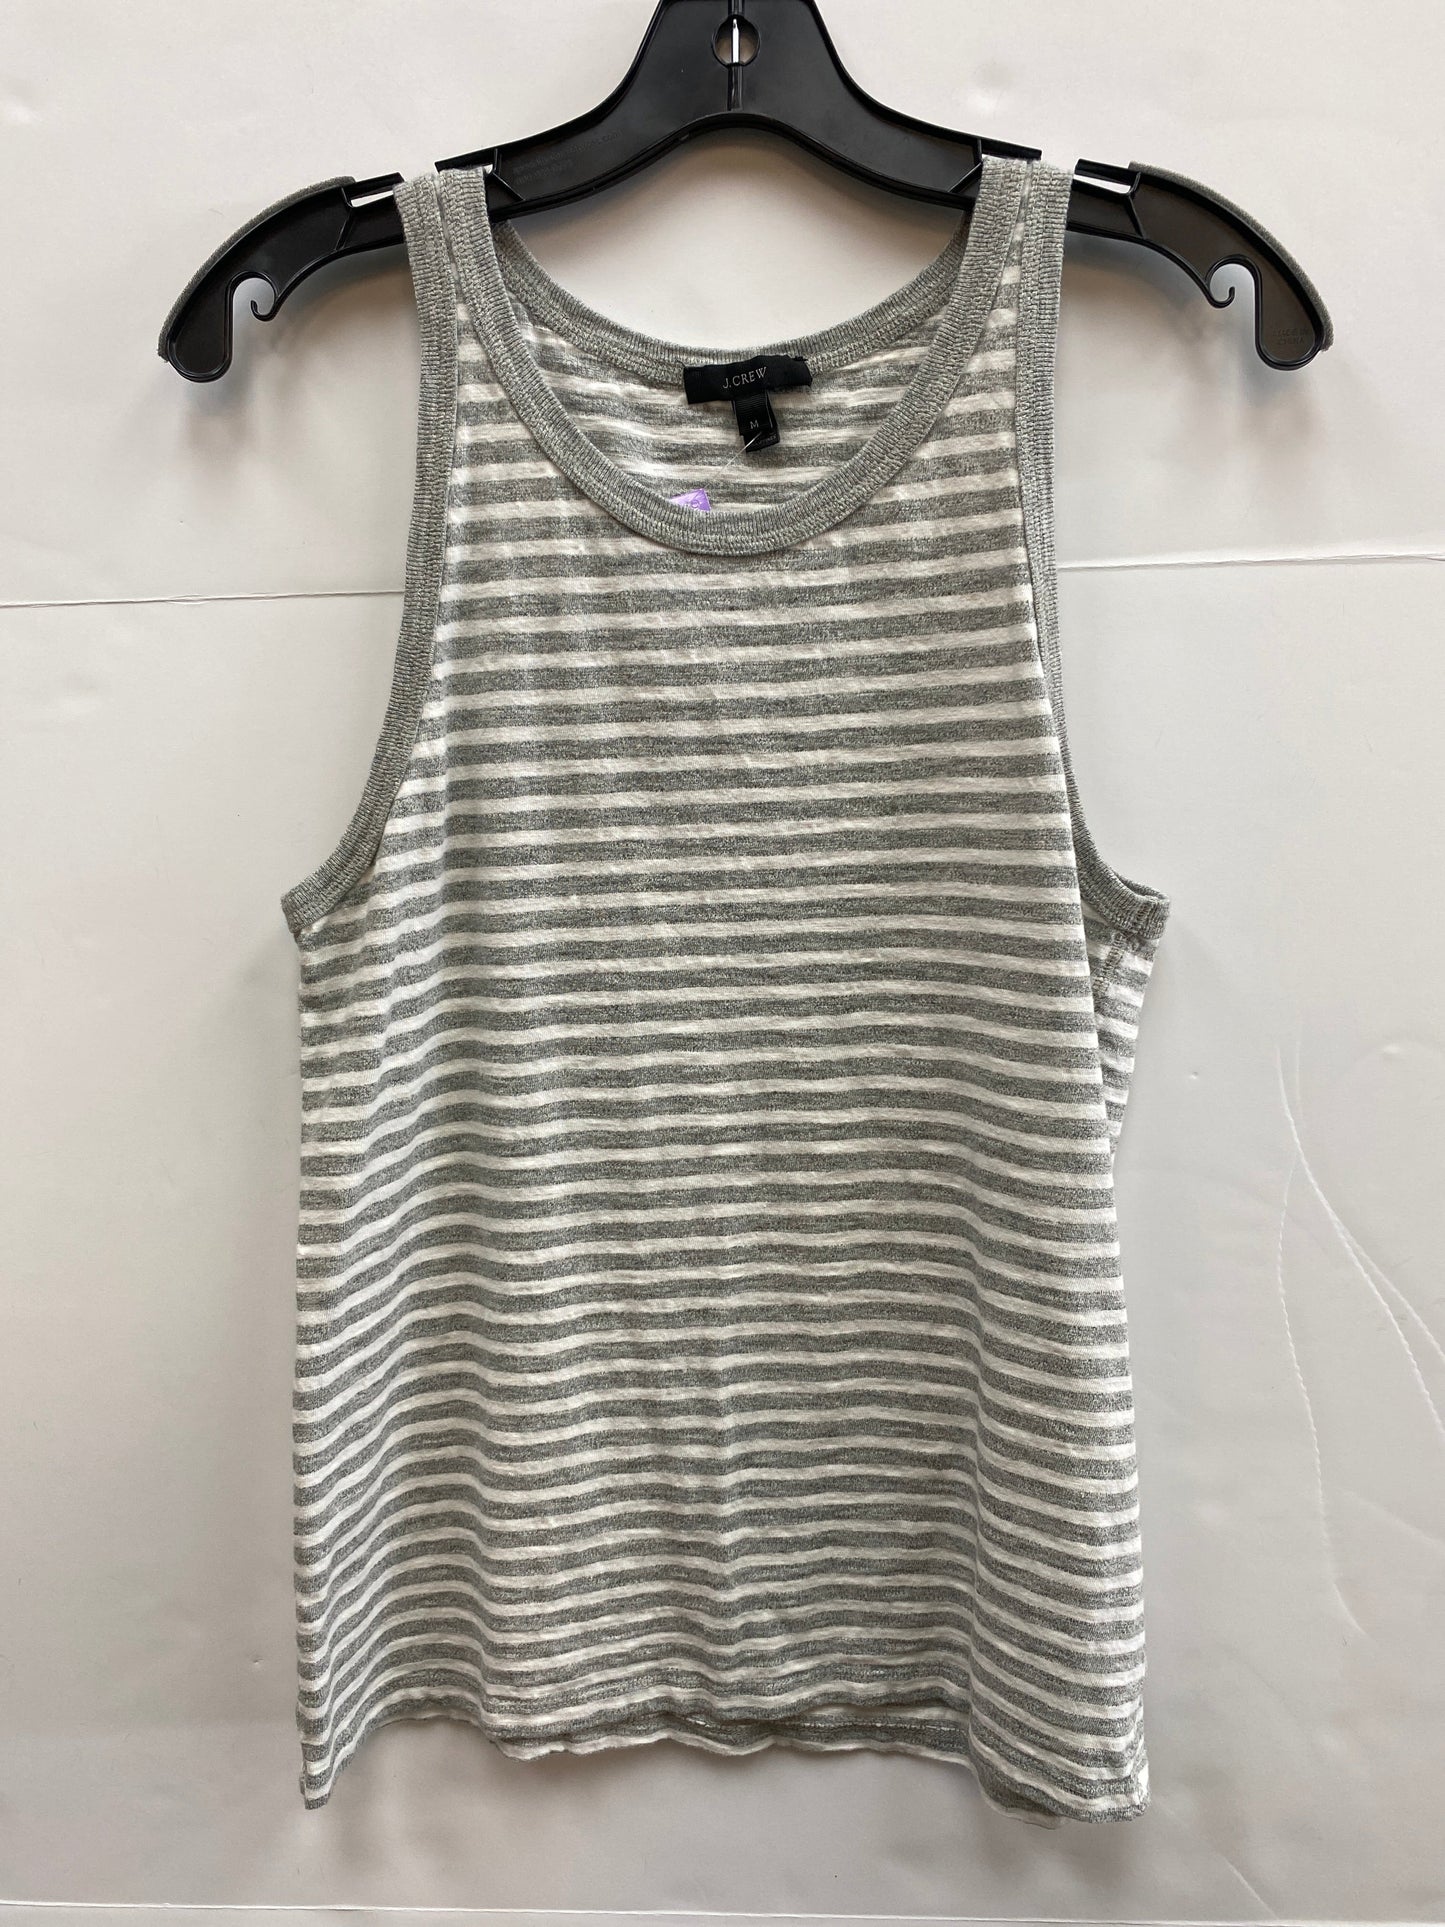 Top Sleeveless By J Crew  Size: M